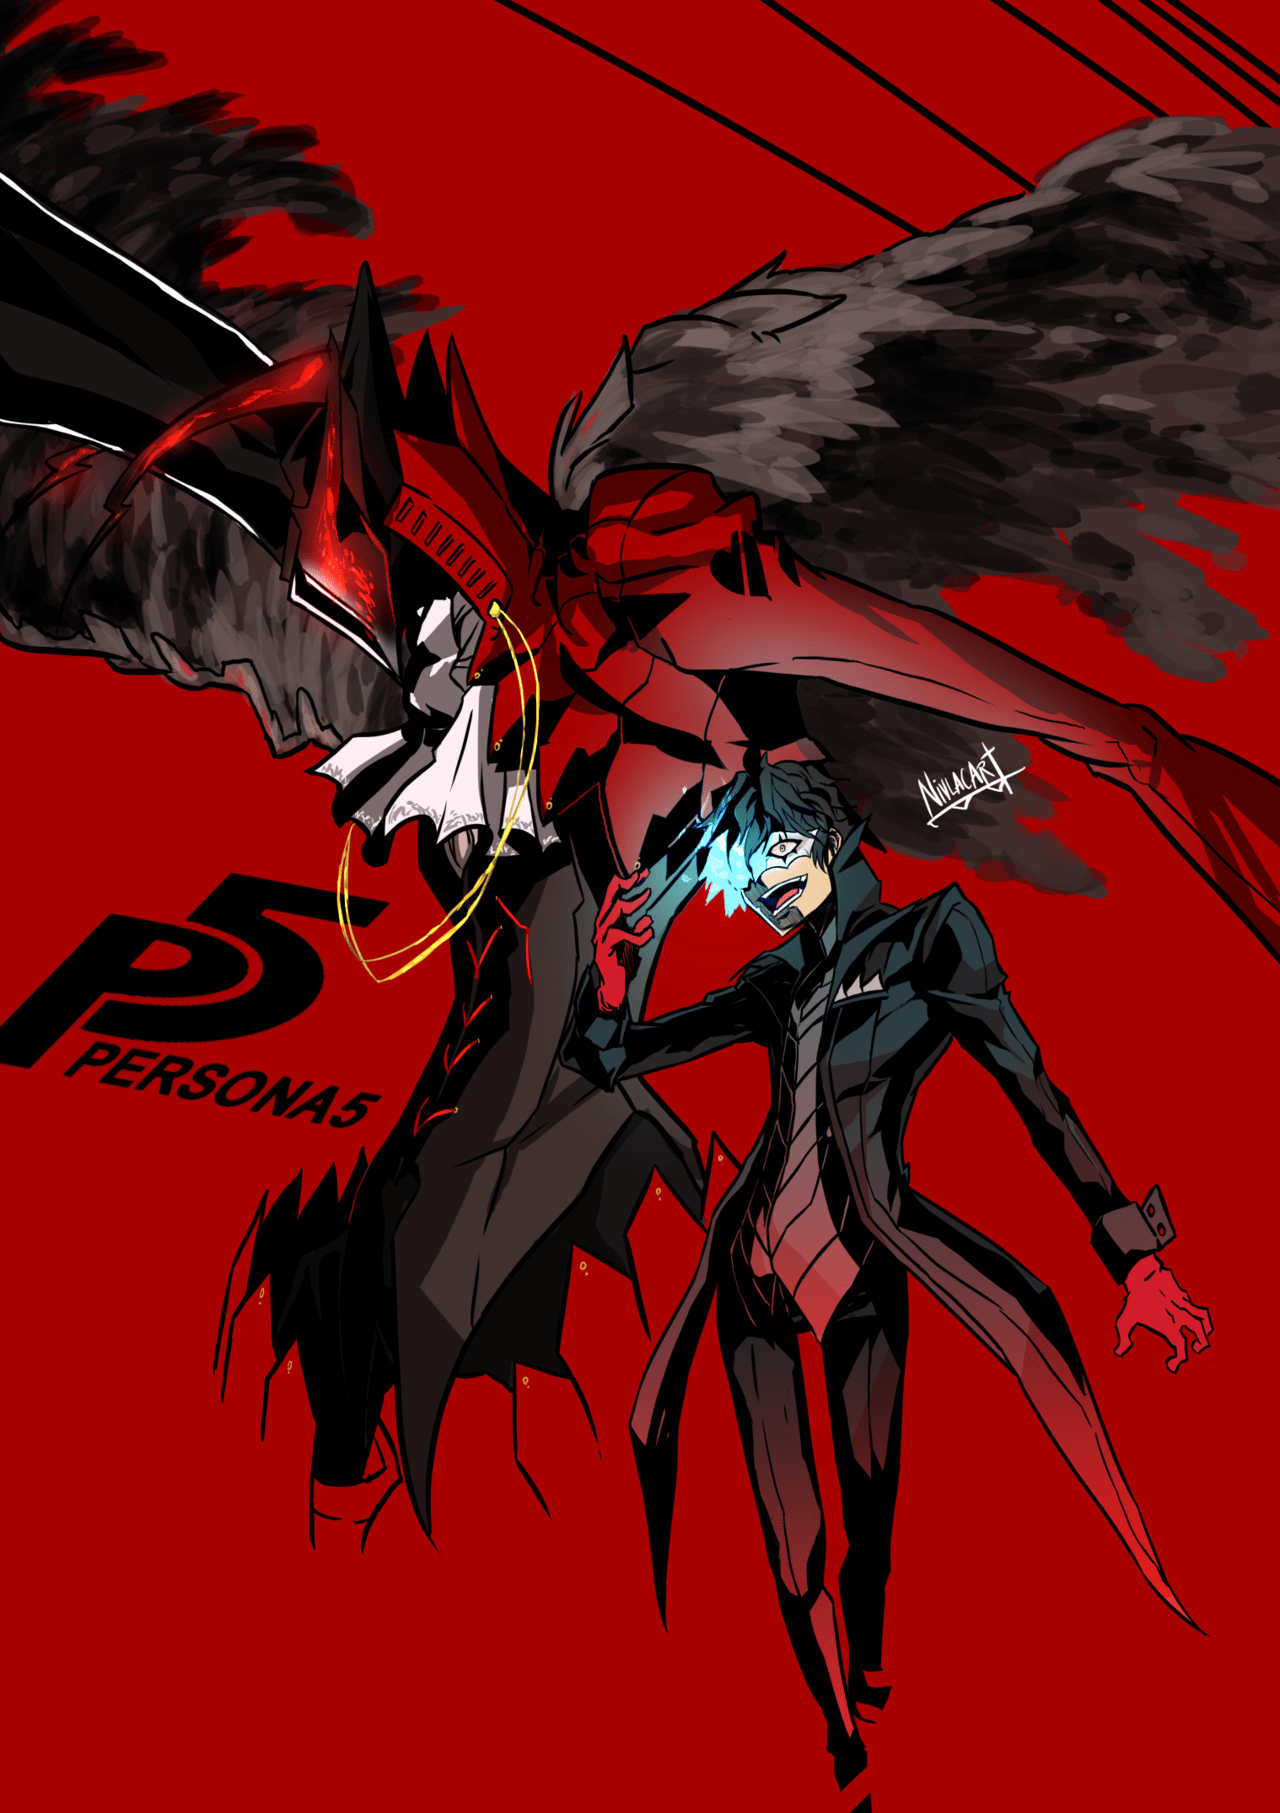 Persona 5 Arsene Wallpapers - Top Free Persona 5 Arsene Backgrounds ...